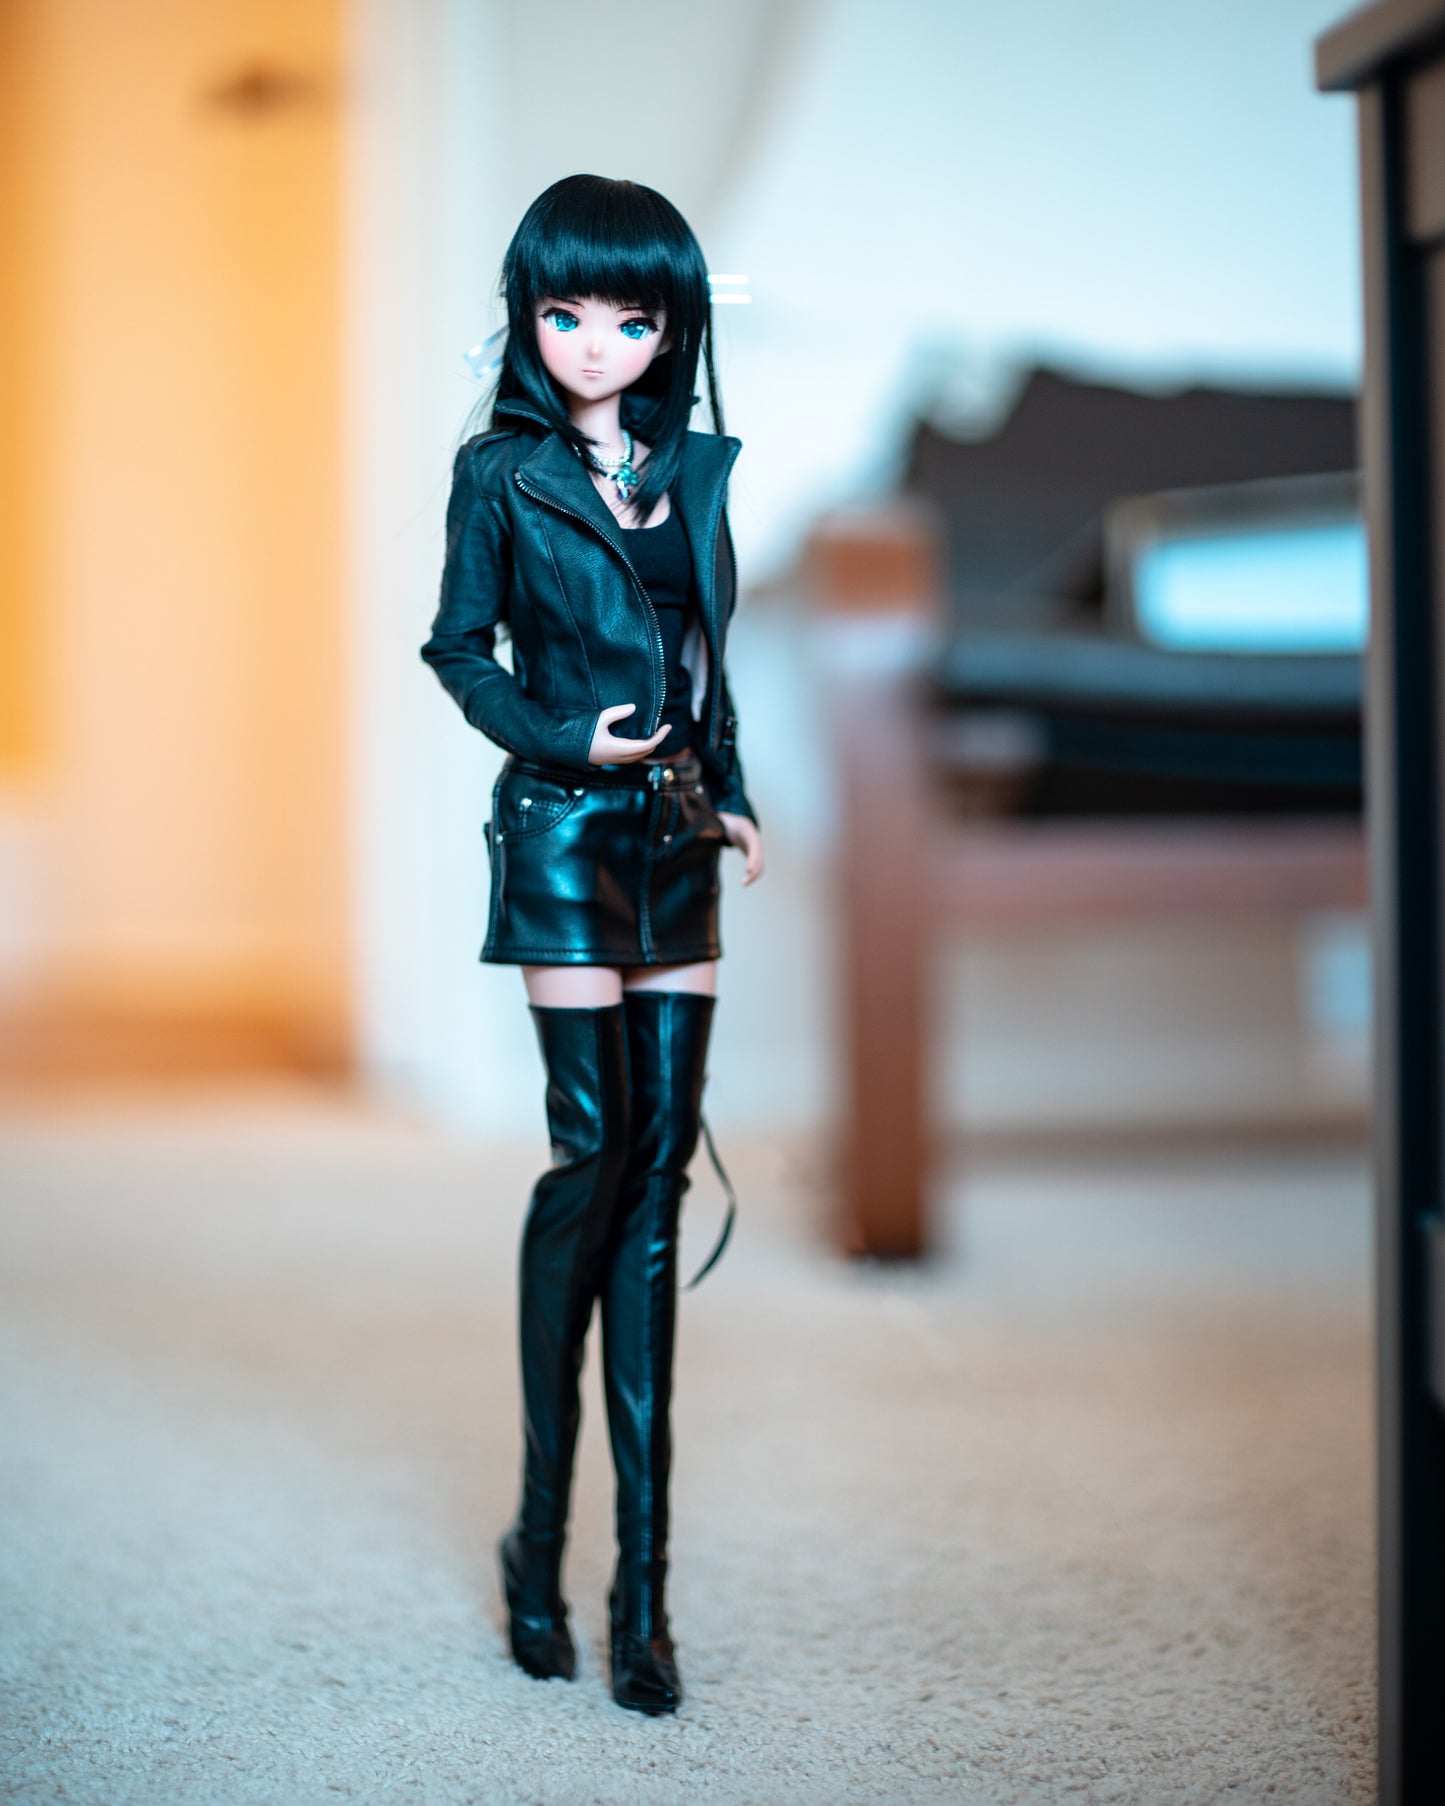 Wet Black High Stiletto Boots BJD 1/3 SD16 (fits Smart Doll and DD)